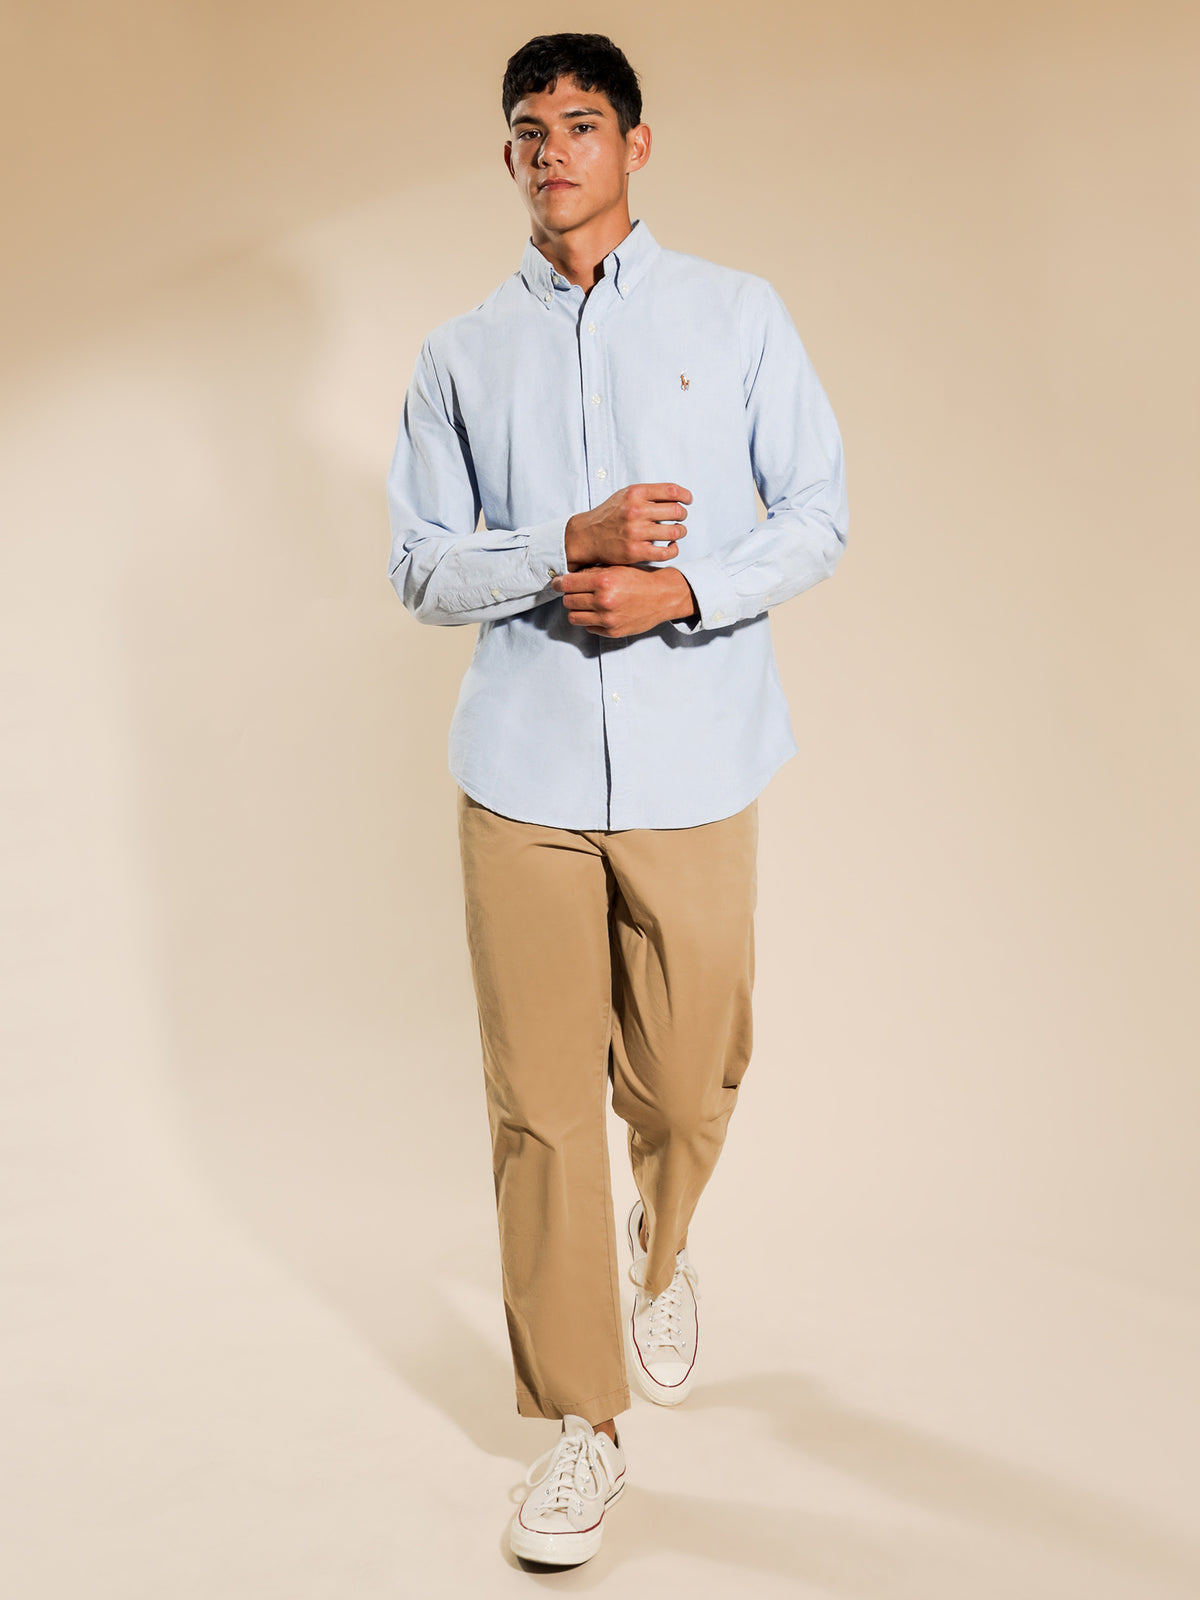 Oxford Long Sleeve Shirt in Blue